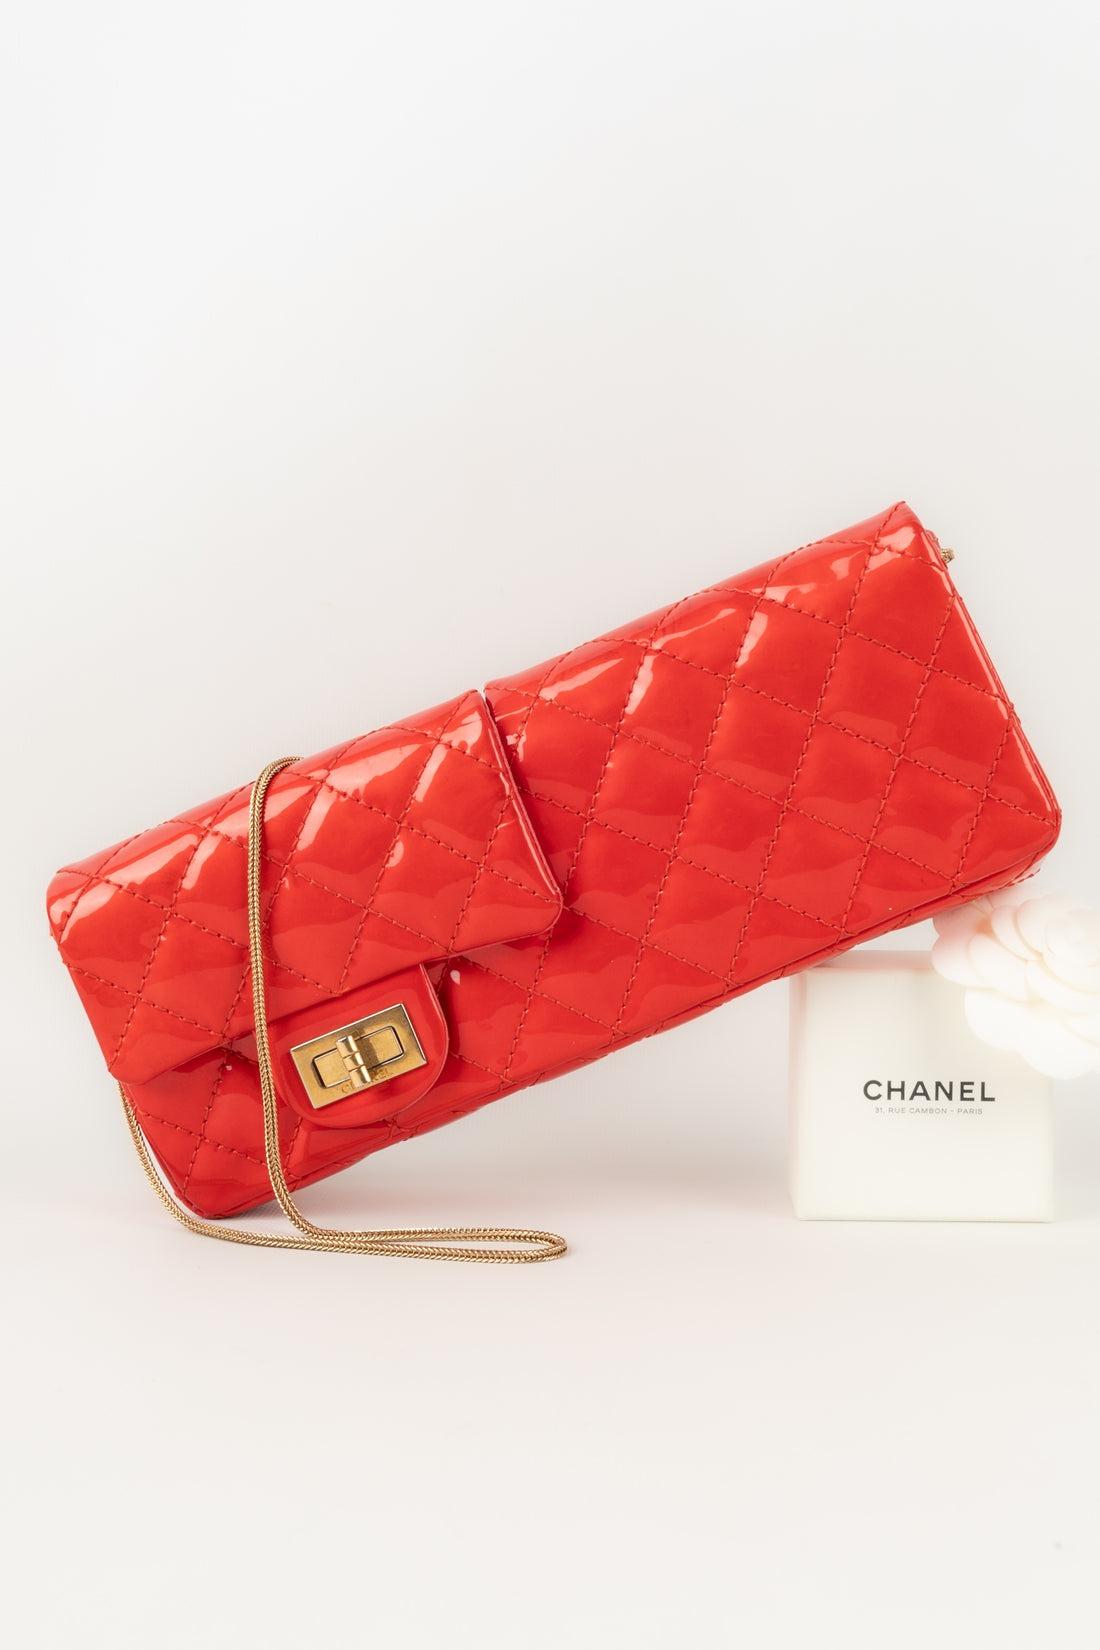 Chanel - (Made in France) Baguette bag with double pocket in red patent leather with golden metal elements and a serial number. 2008/2009 Collection.

Additional information:
Condition: Very good condition
Dimensions: Length: 24 cm - Height: 10 cm -